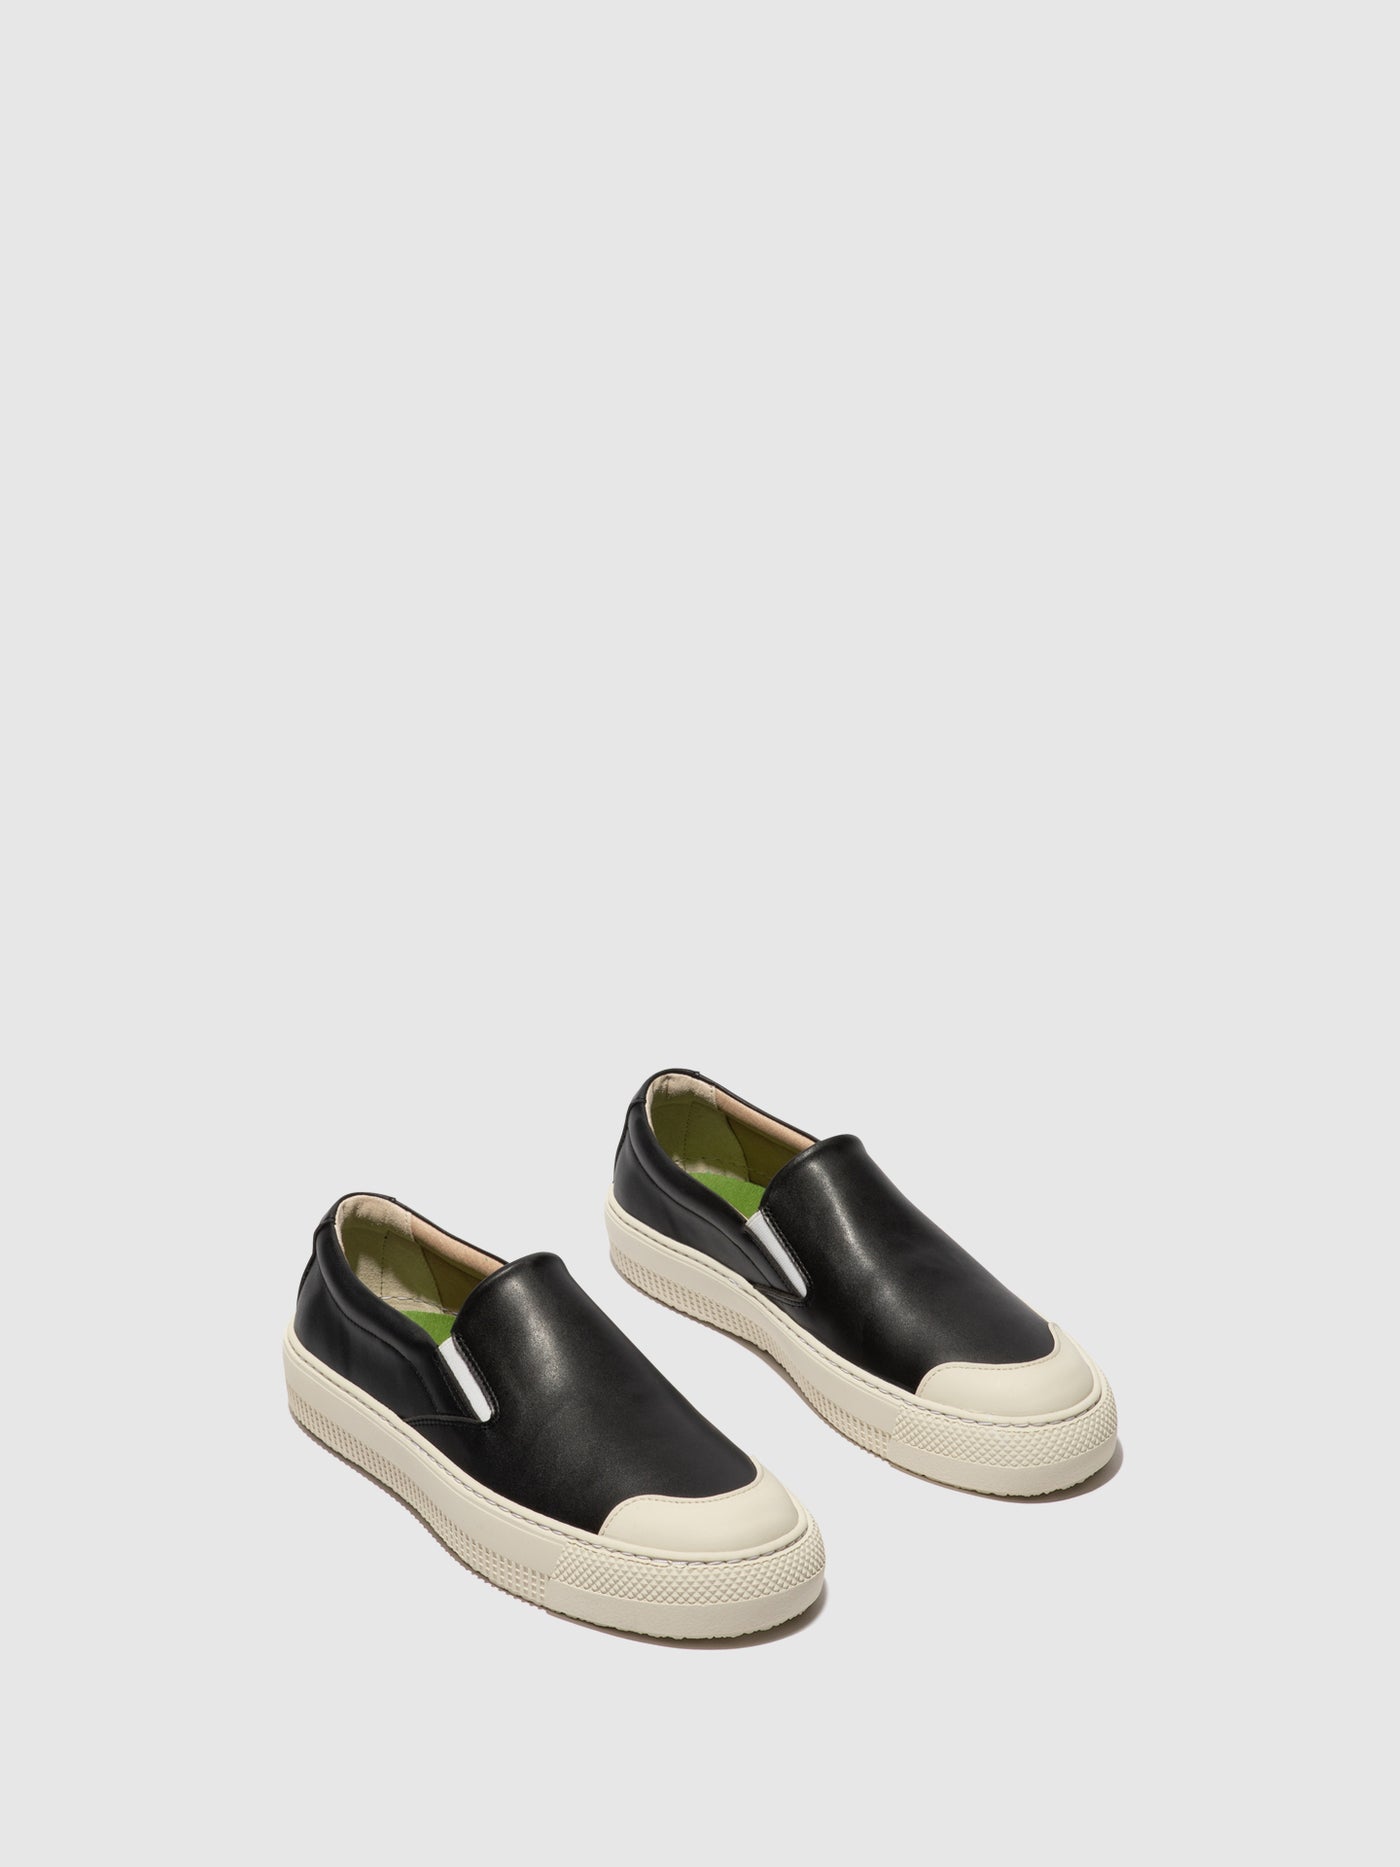 Slip-on Trainers TOAF584FLY BLACK